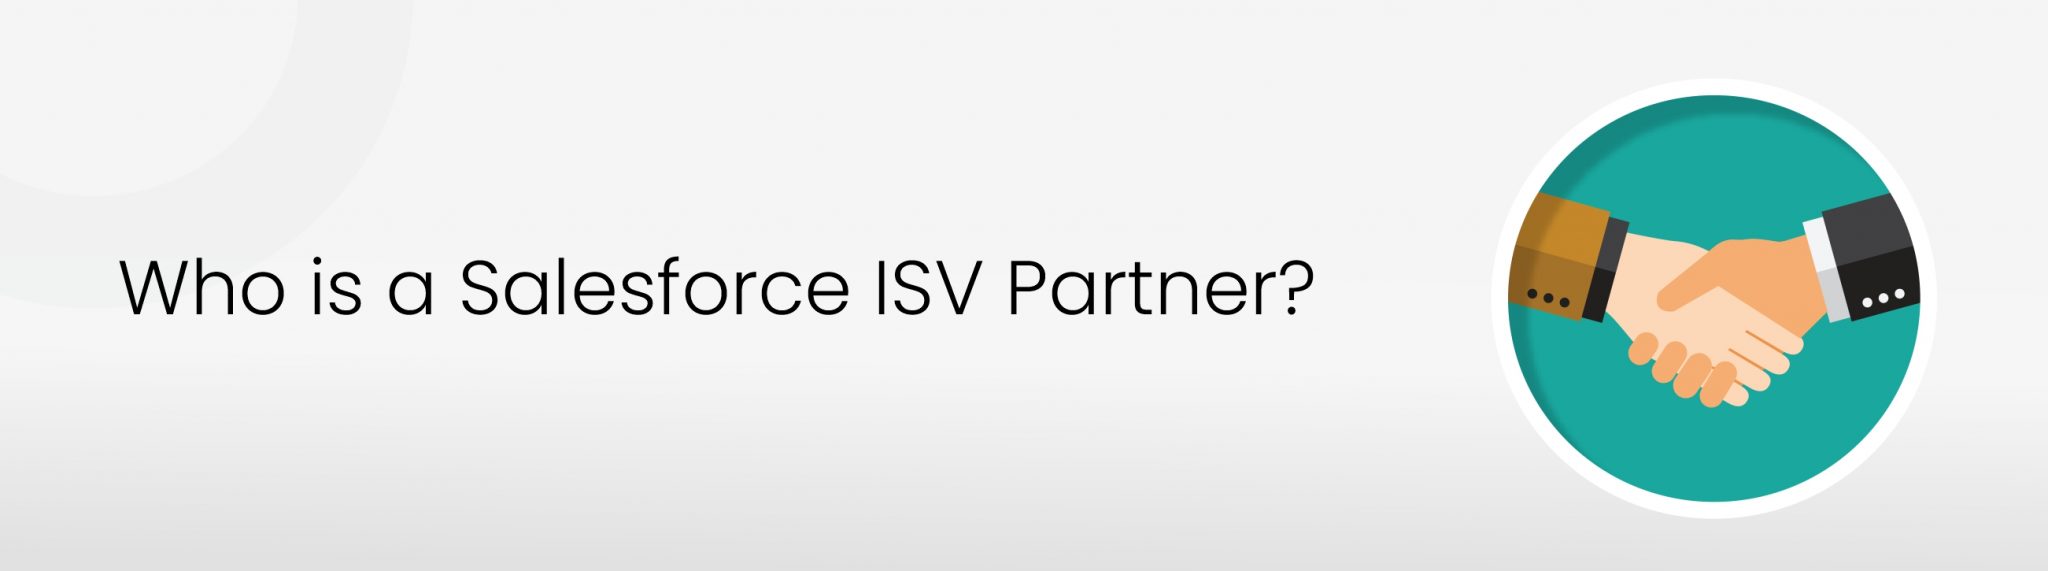 Who-Is-A-Salesforce-ISV-Partner